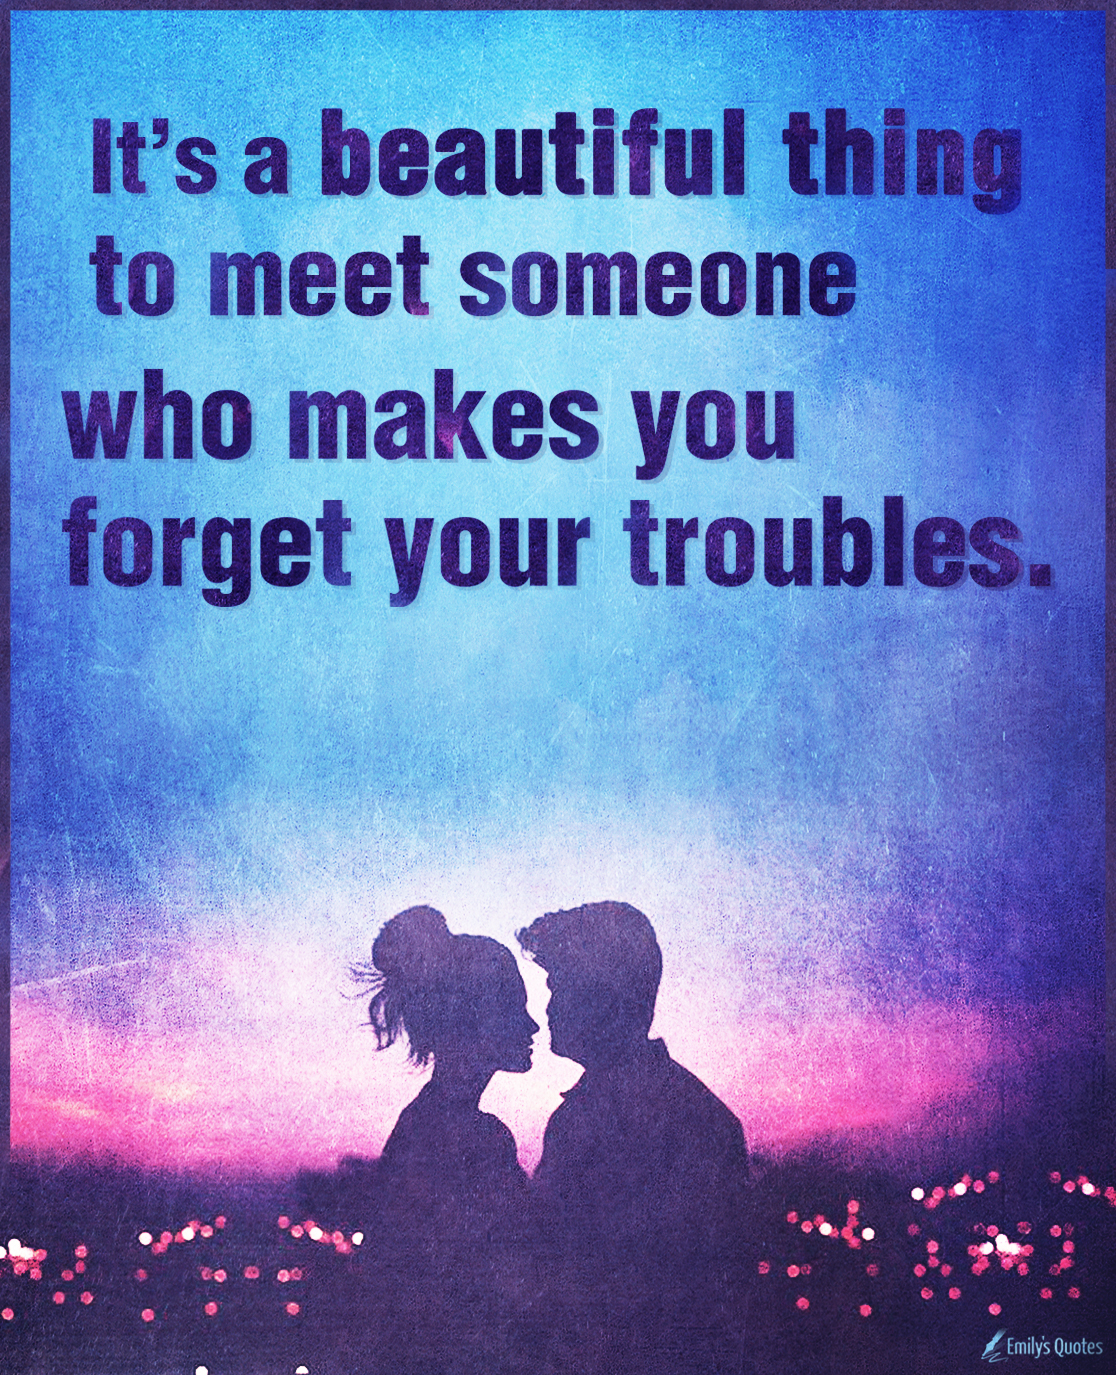 It’s a beautiful thing to meet someone who makes you forget your troubles